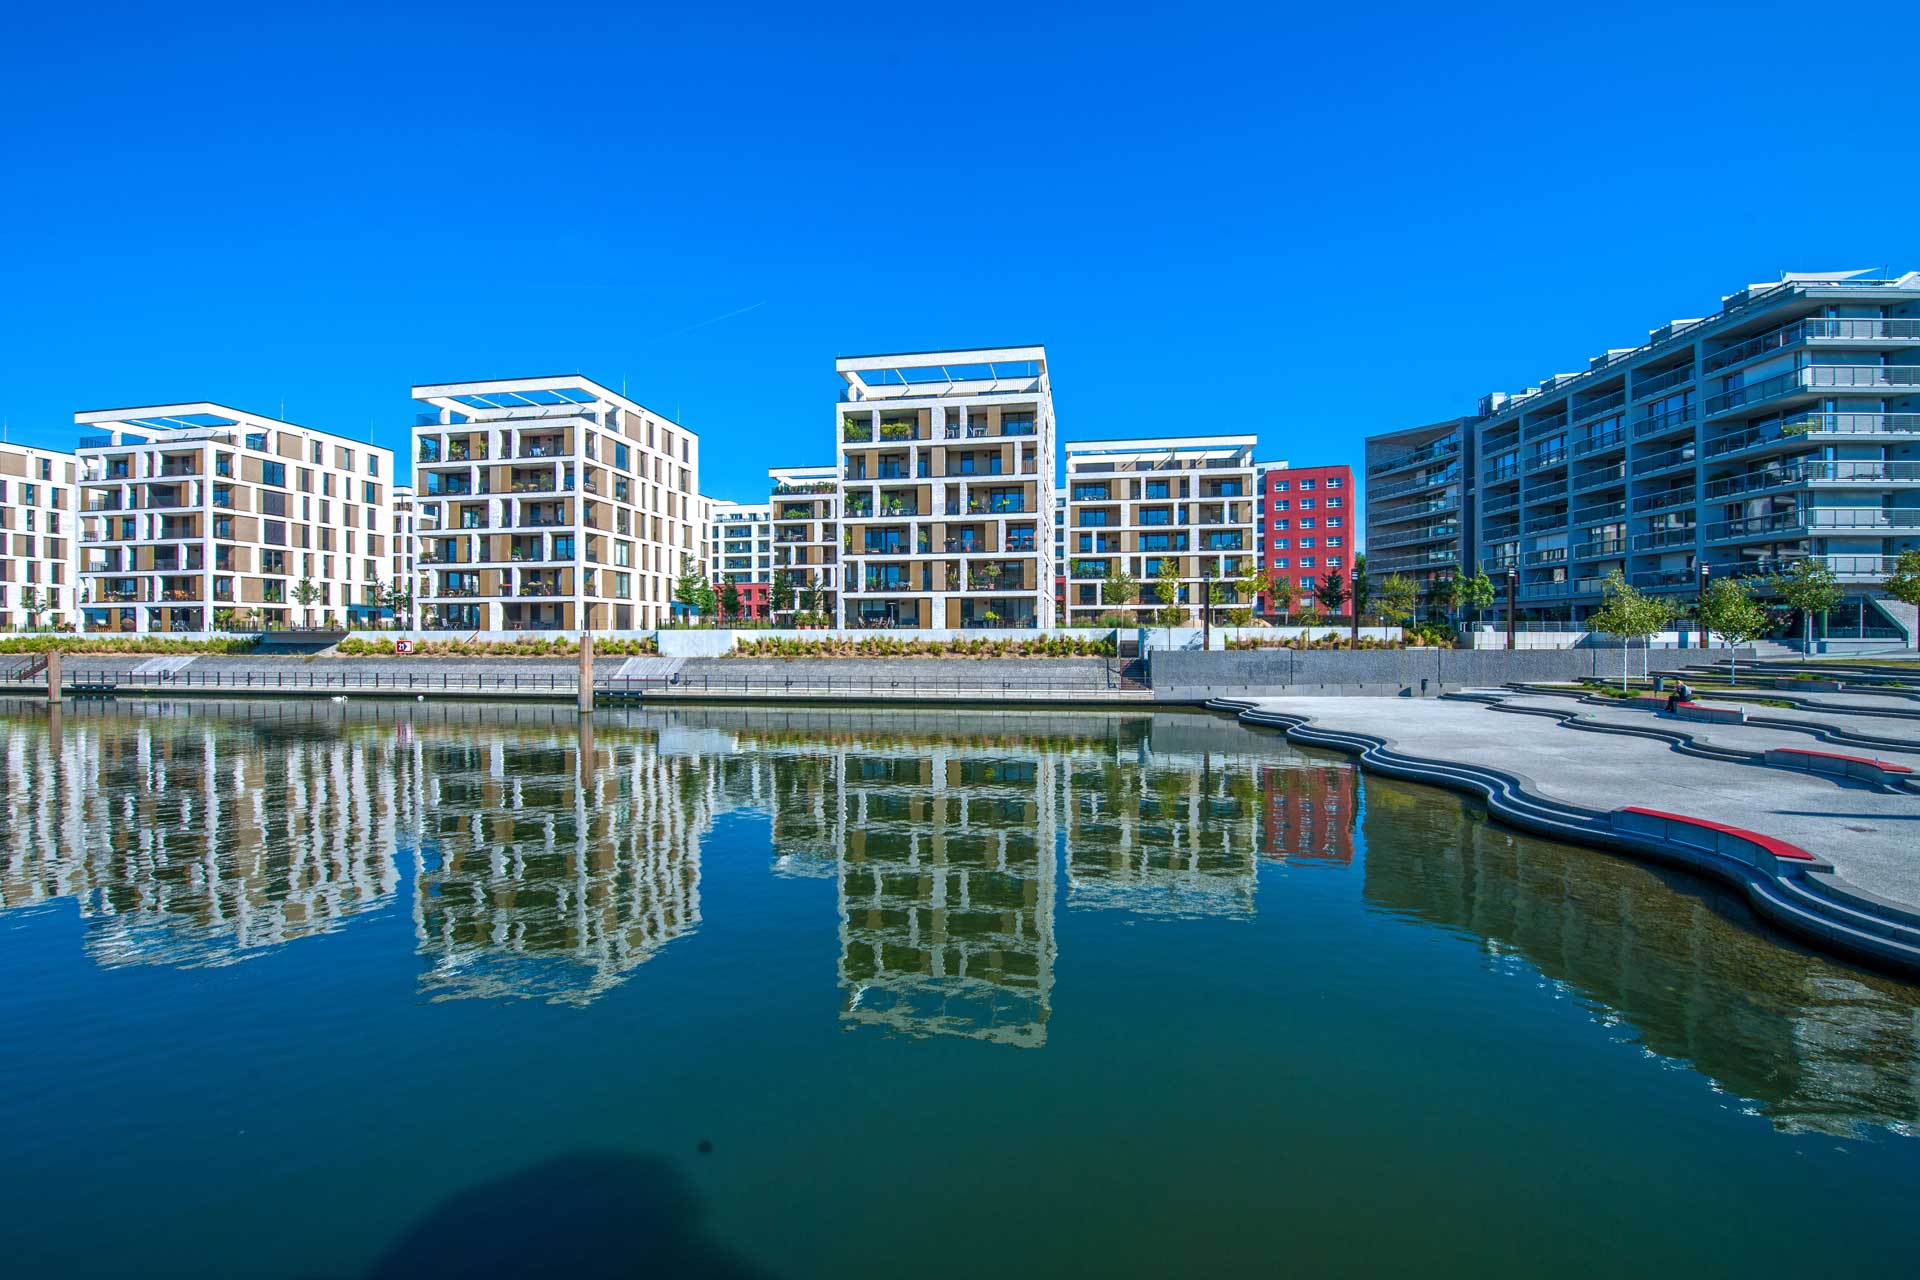 A contemporary urban riverside development with several white structures adorned with balconies and red highlights, mirrored in the tranquil waters of a neighboring river or canal beneath a clear blue sky.